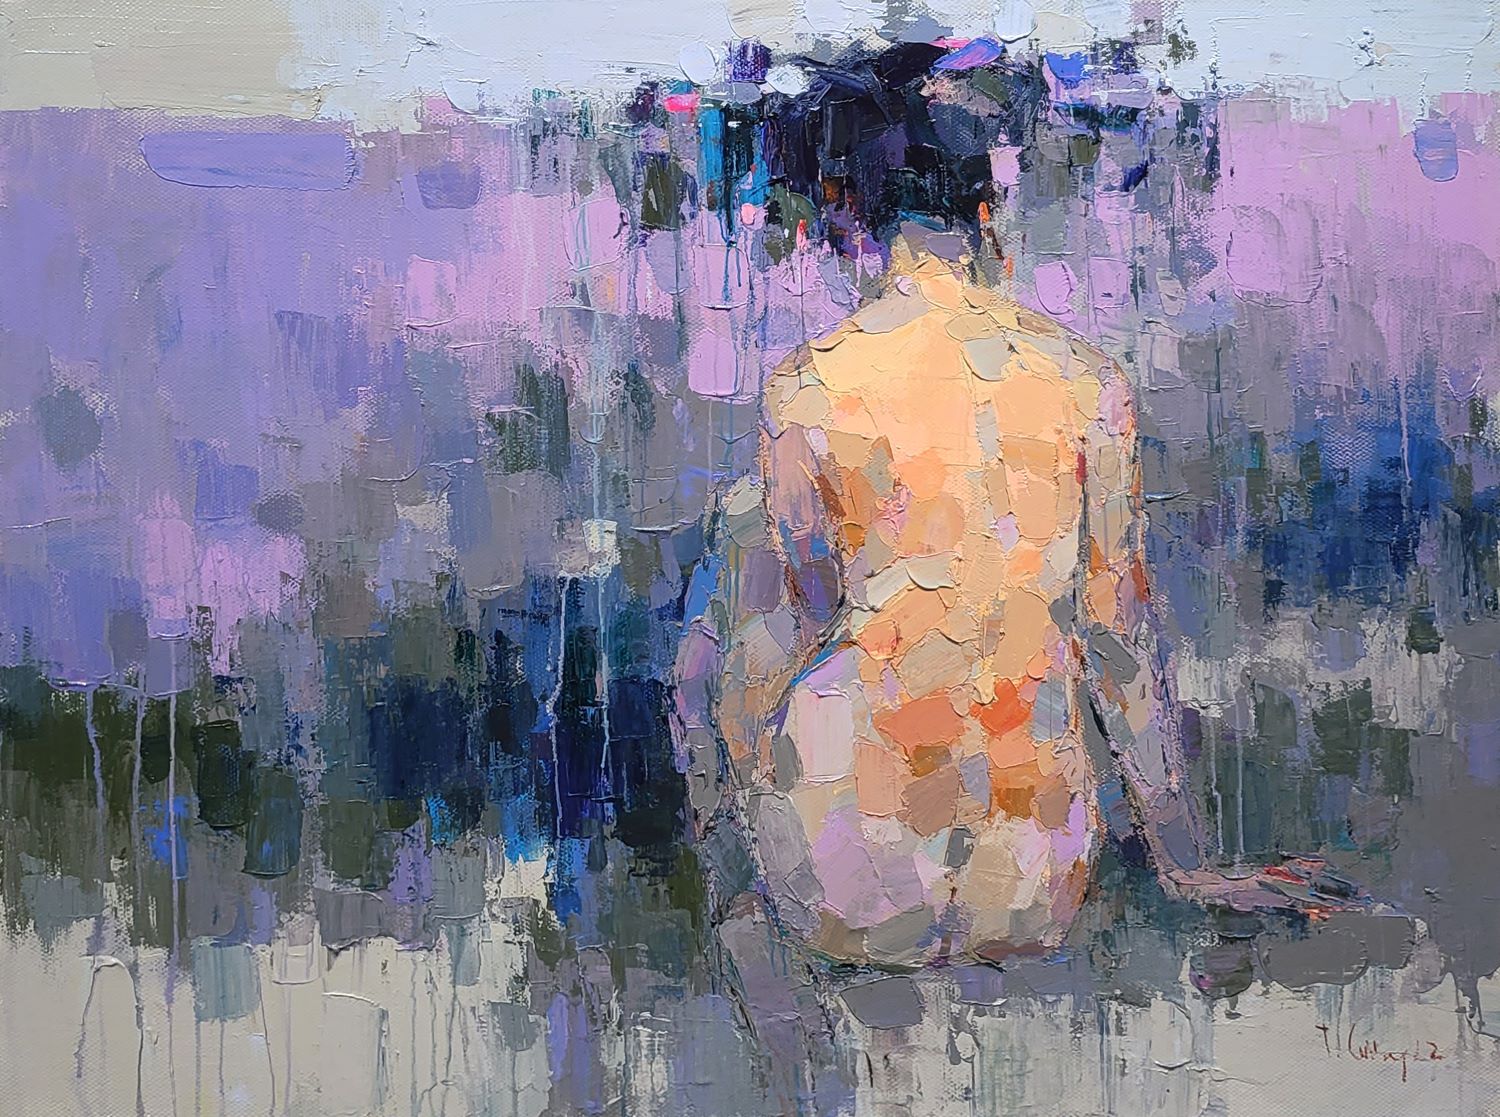 Nude 37 - Vietnamese Oil Painting by Artist Danh Cuong